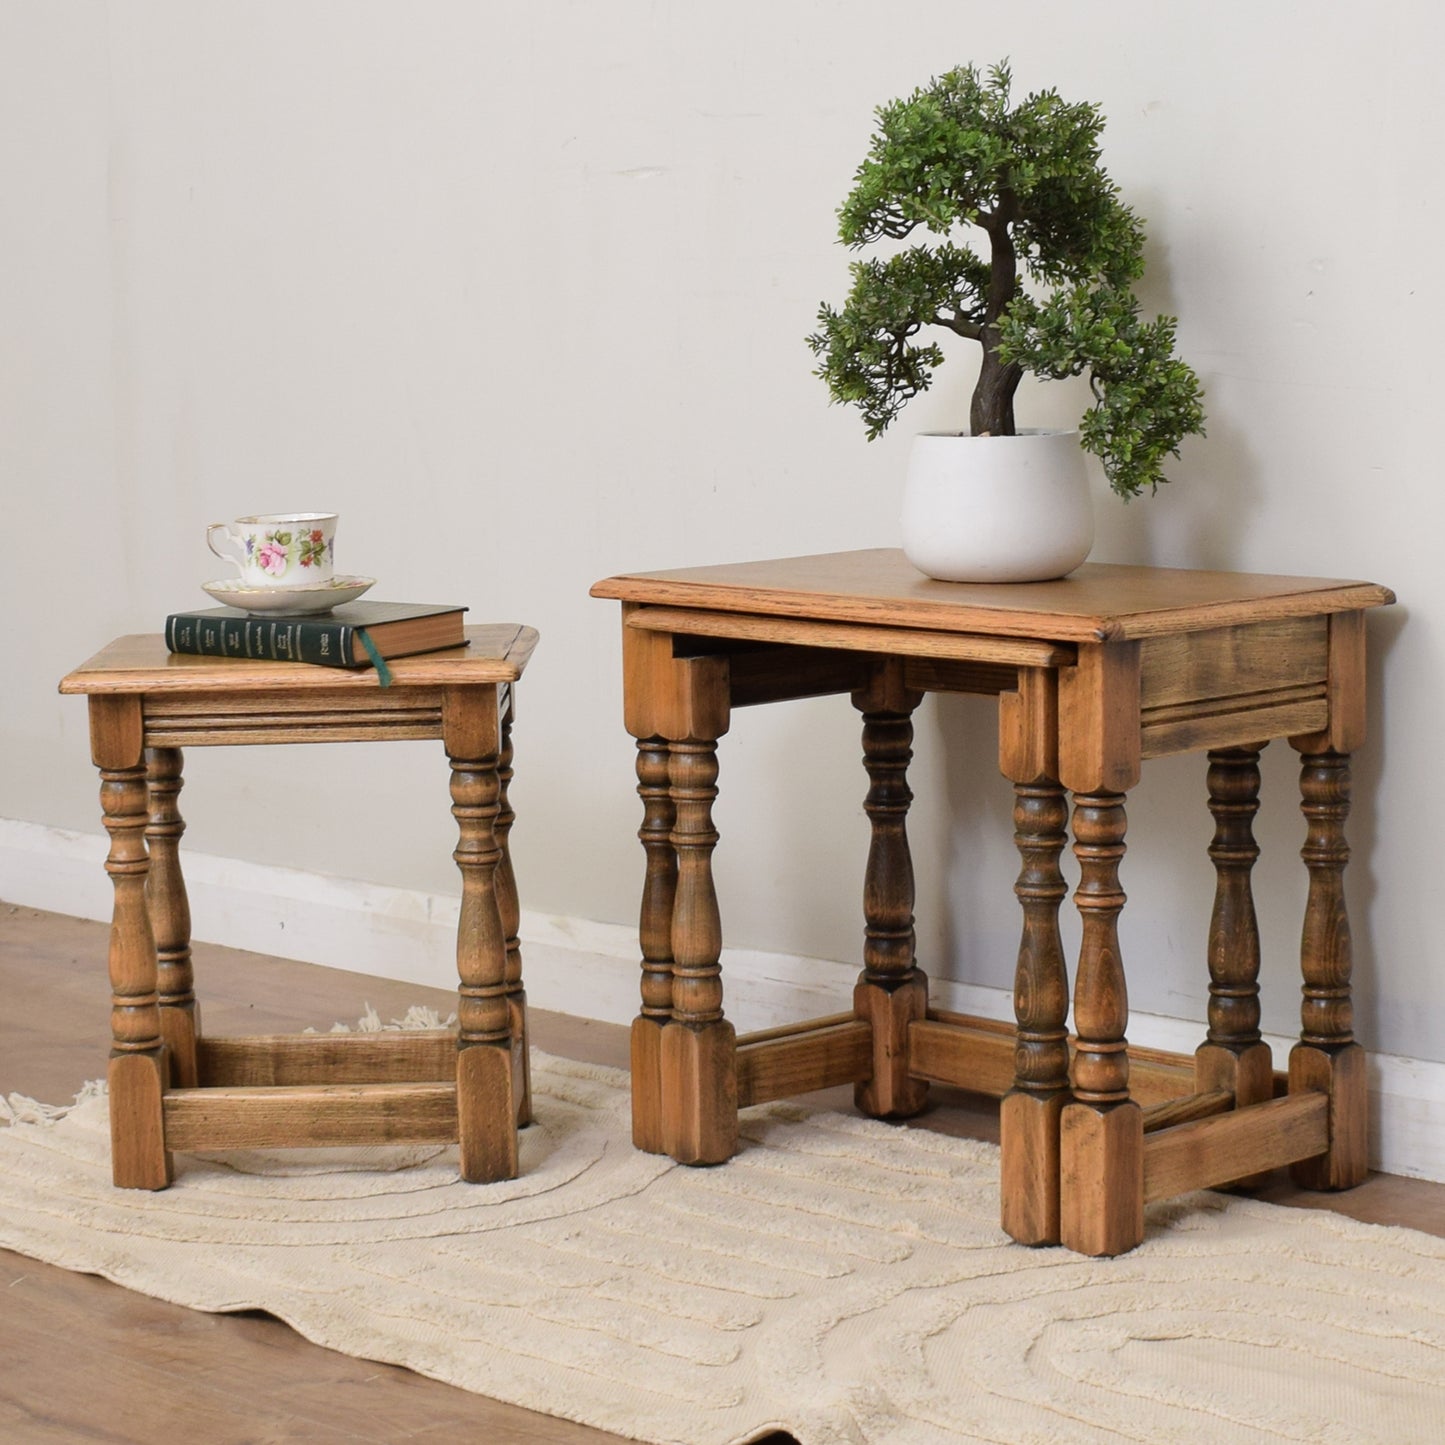 Solid Oak Bevan Funnell Nest Of Tables